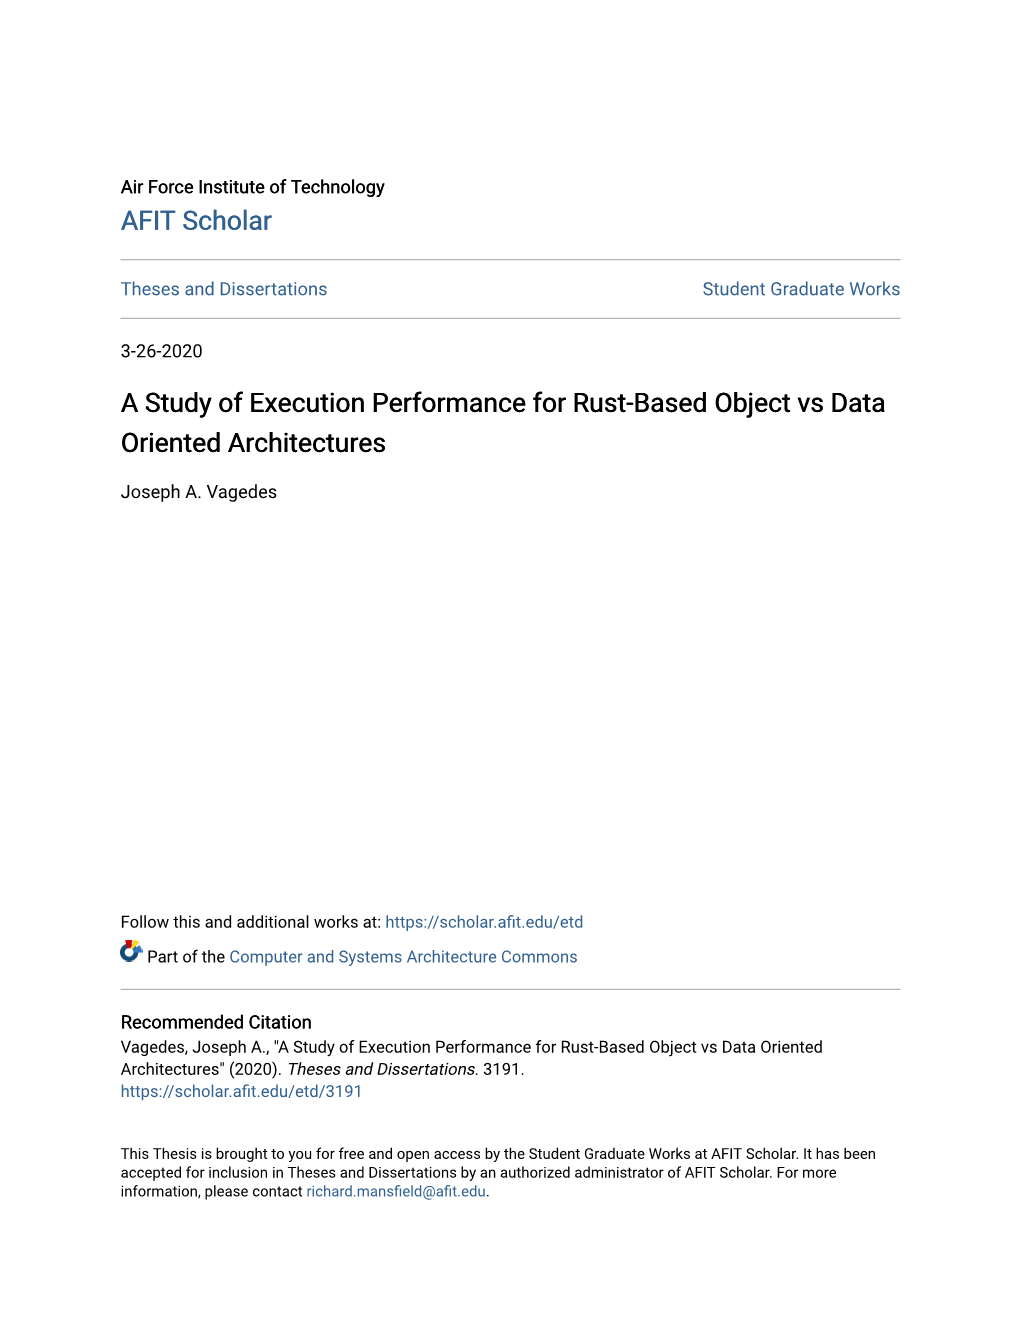 A Study of Execution Performance for Rust-Based Object Vs Data Oriented Architectures